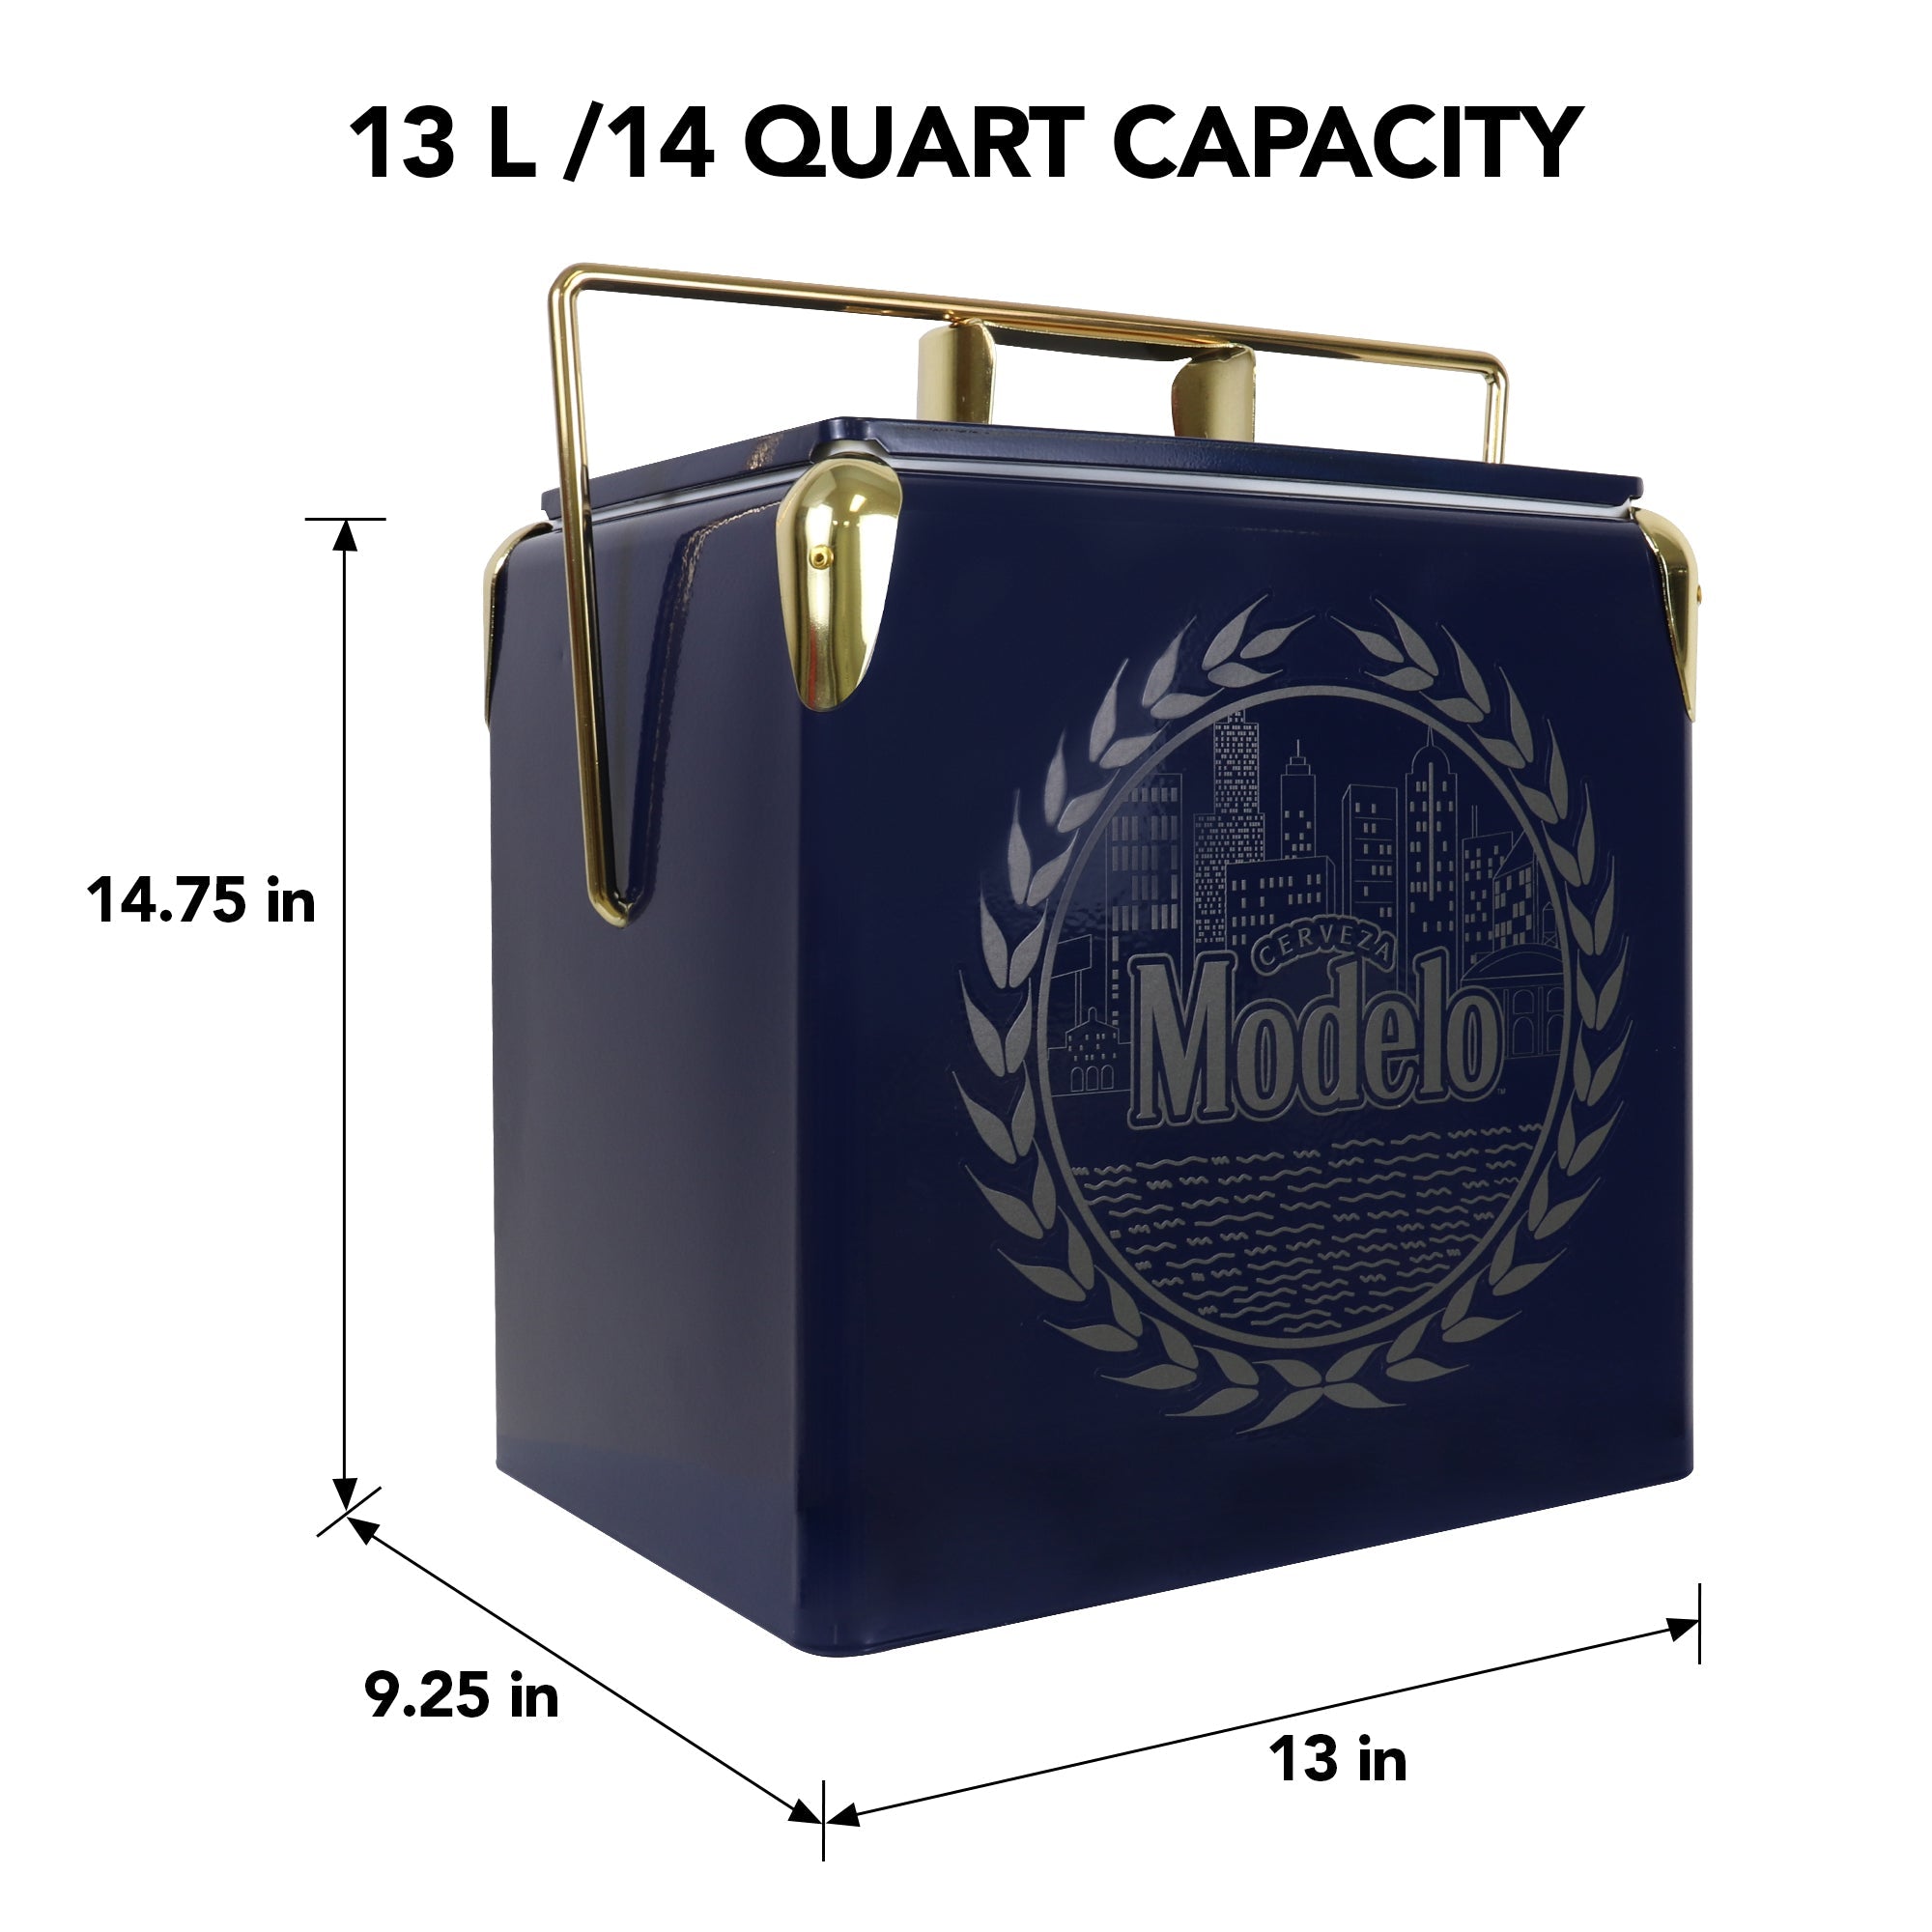 Product shot of Modelo 14 liter ice chest with bottle opener, closed, on a white background, with dimensions labeled. Text above reads, "13L/14 quart capacity"